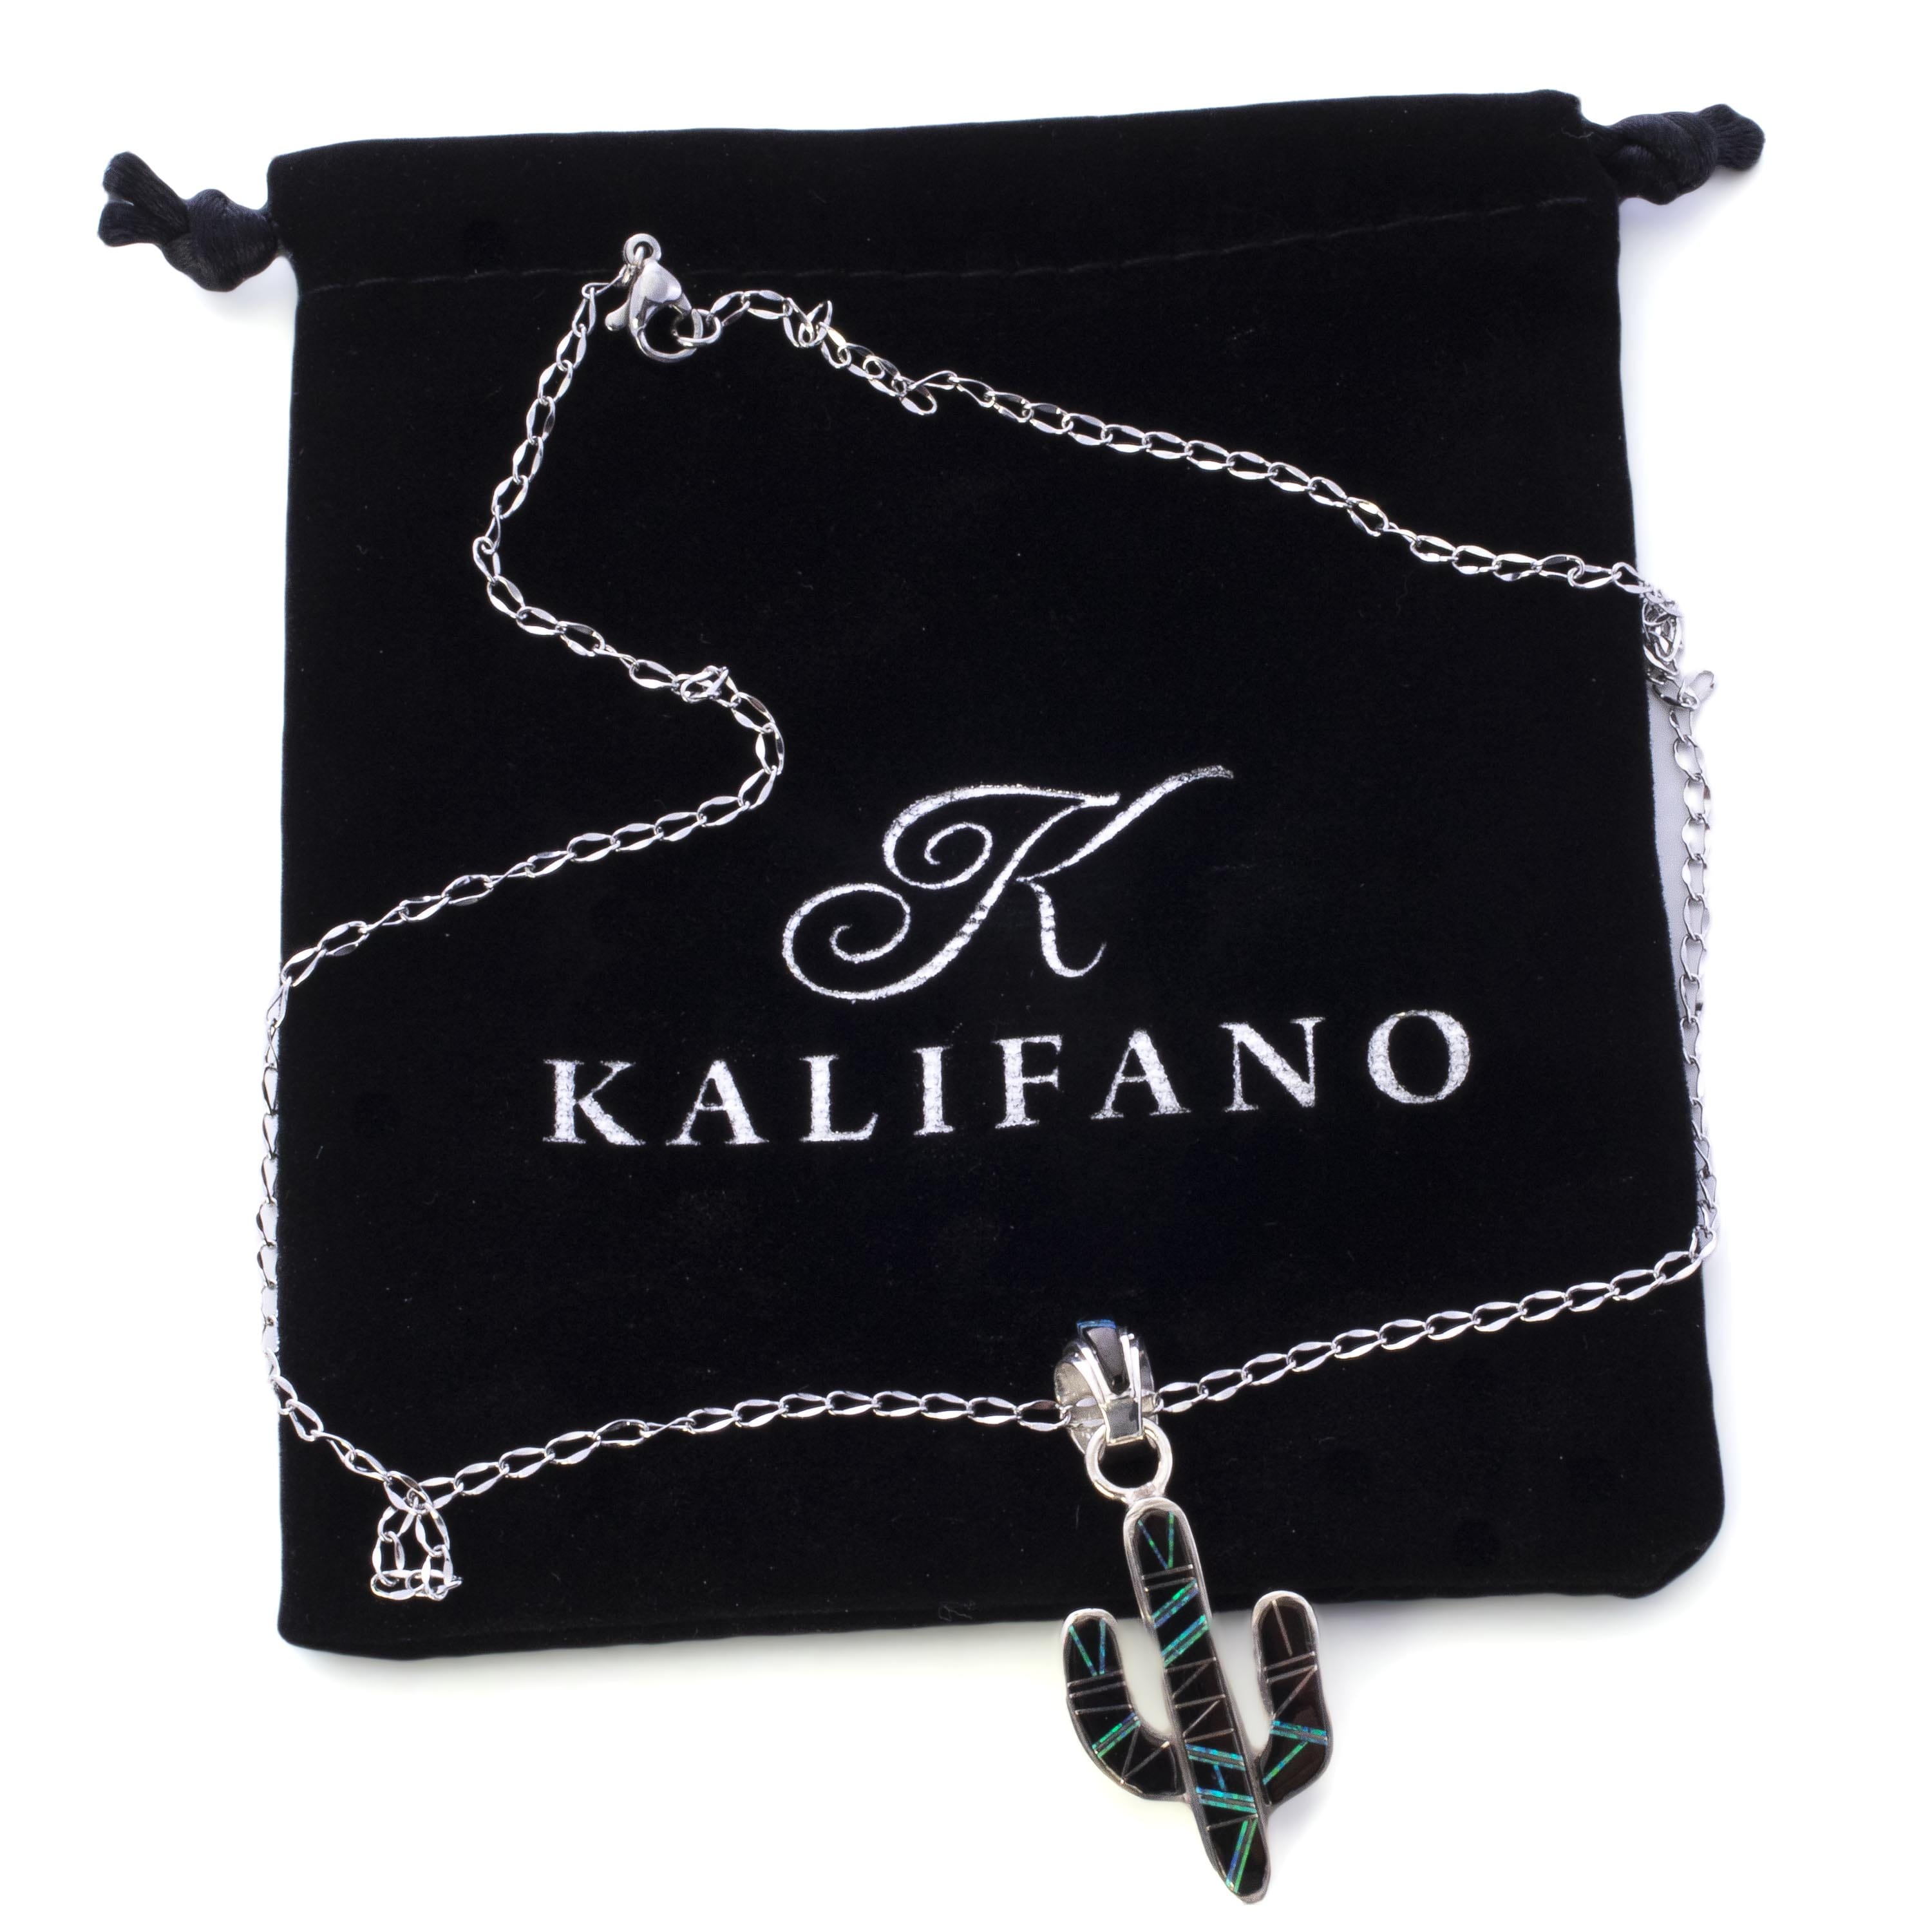 Kalifano Southwest Silver Jewelry Black Onyx Cactus 925 Sterling Silver Pendant USA Handmade with Opal Accent NMN.0602.BO